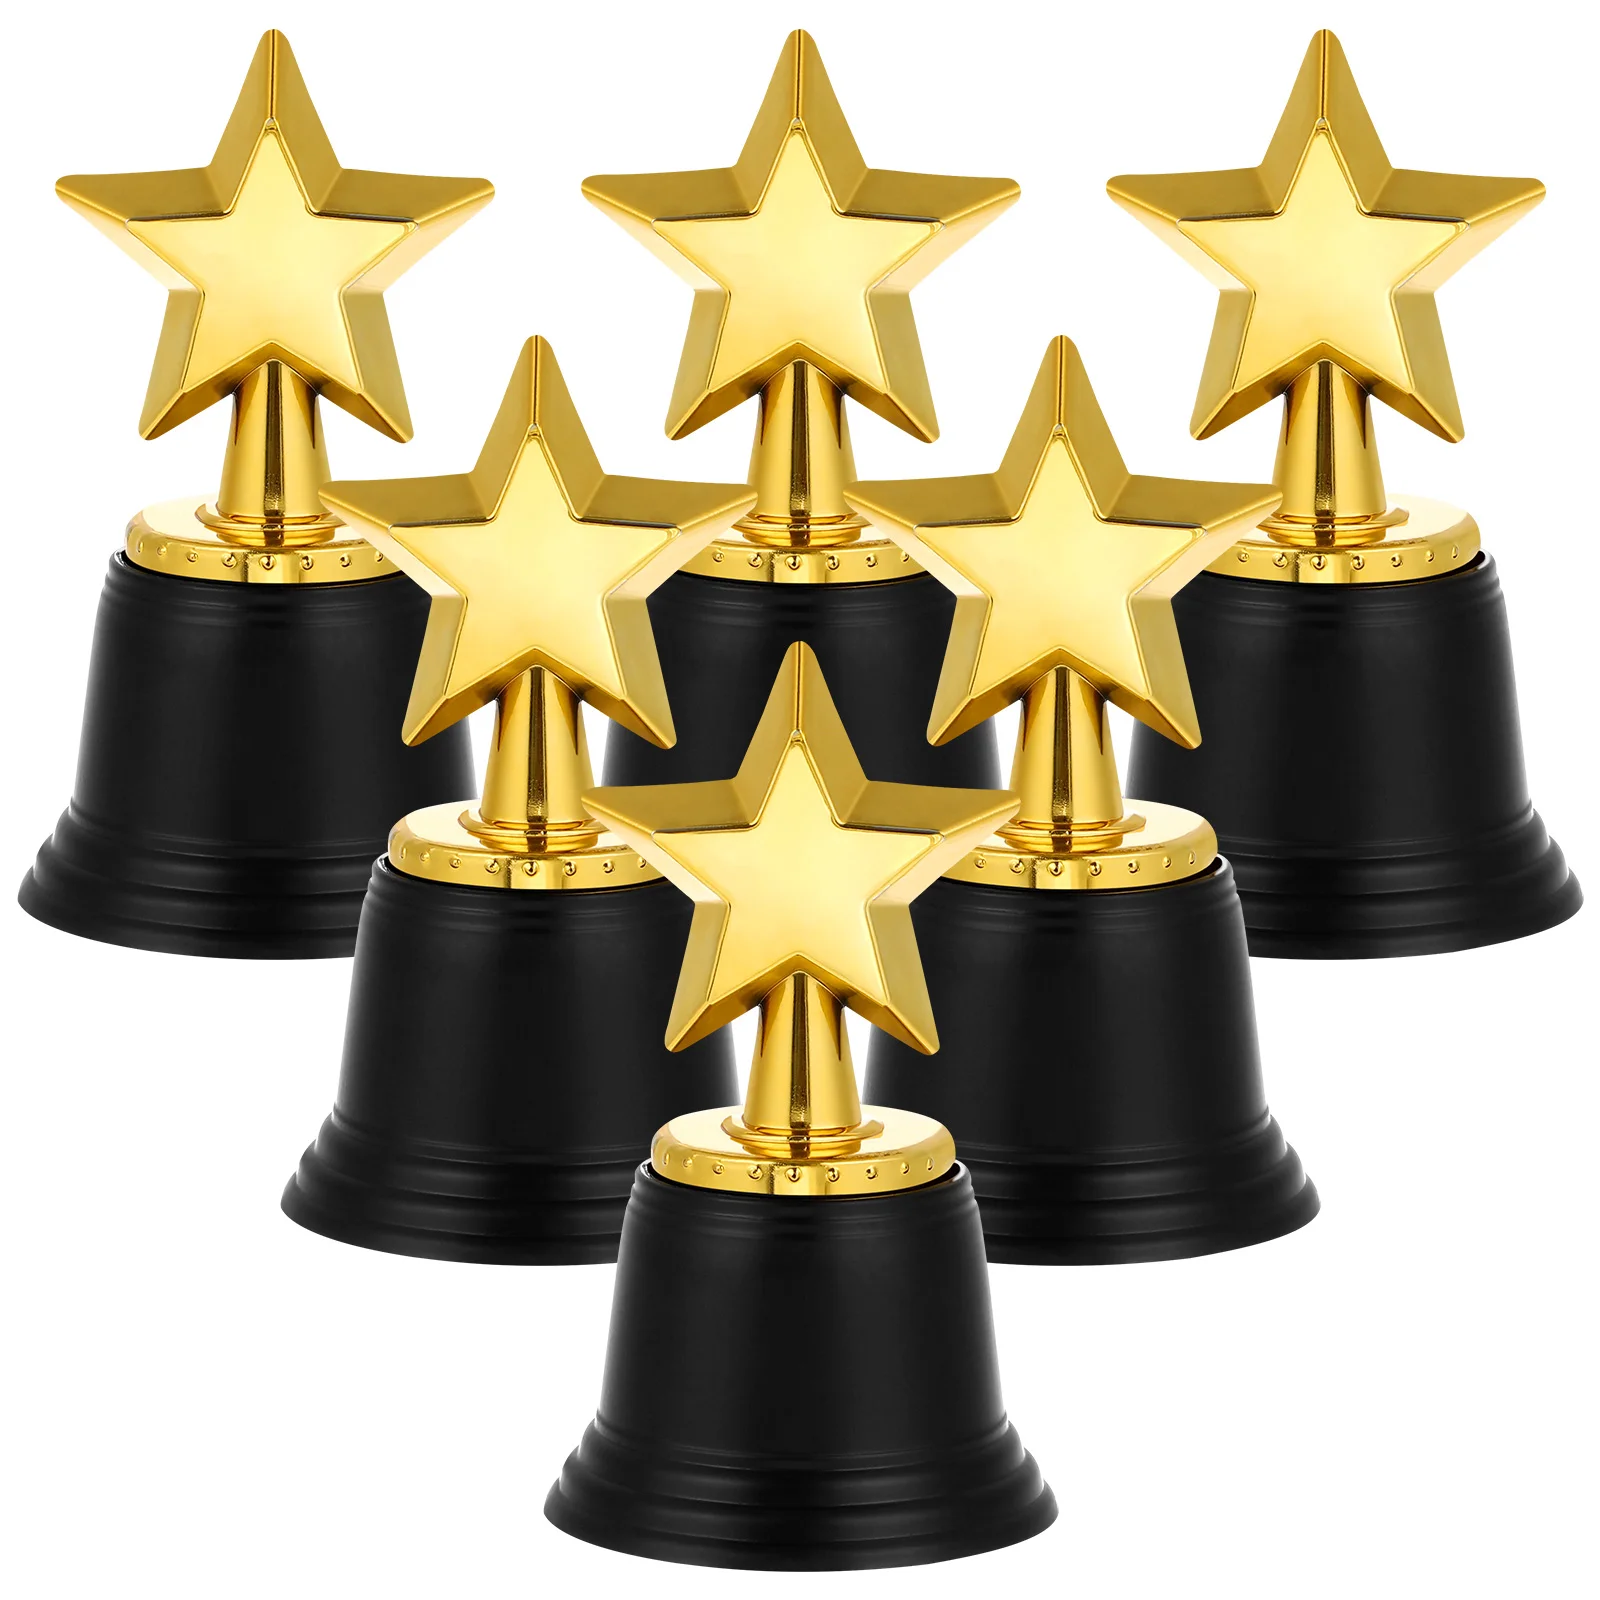 

Trophy Trophies Award Awards Kids Mini Star Cup Gold Favors Party Winner Competition Plastic Toy Funny Prizes Best Football